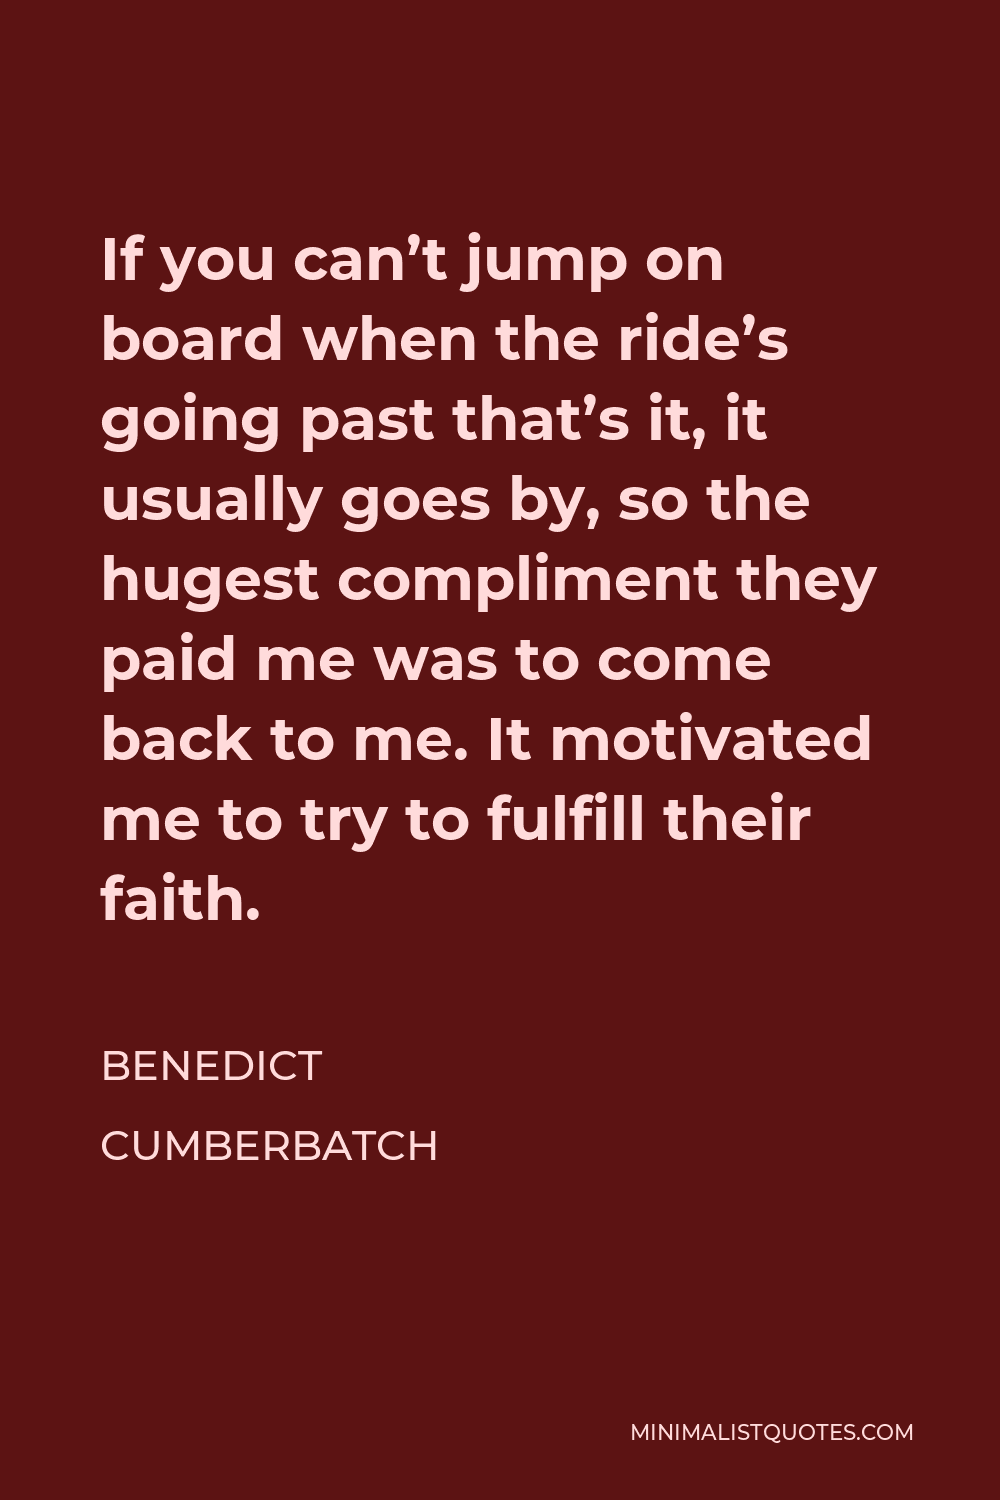 Benedict Cumberbatch Quote - If you can’t jump on board when the ride’s going past that’s it, it usually goes by, so the hugest compliment they paid me was to come back to me. It motivated me to try to fulfill their faith.